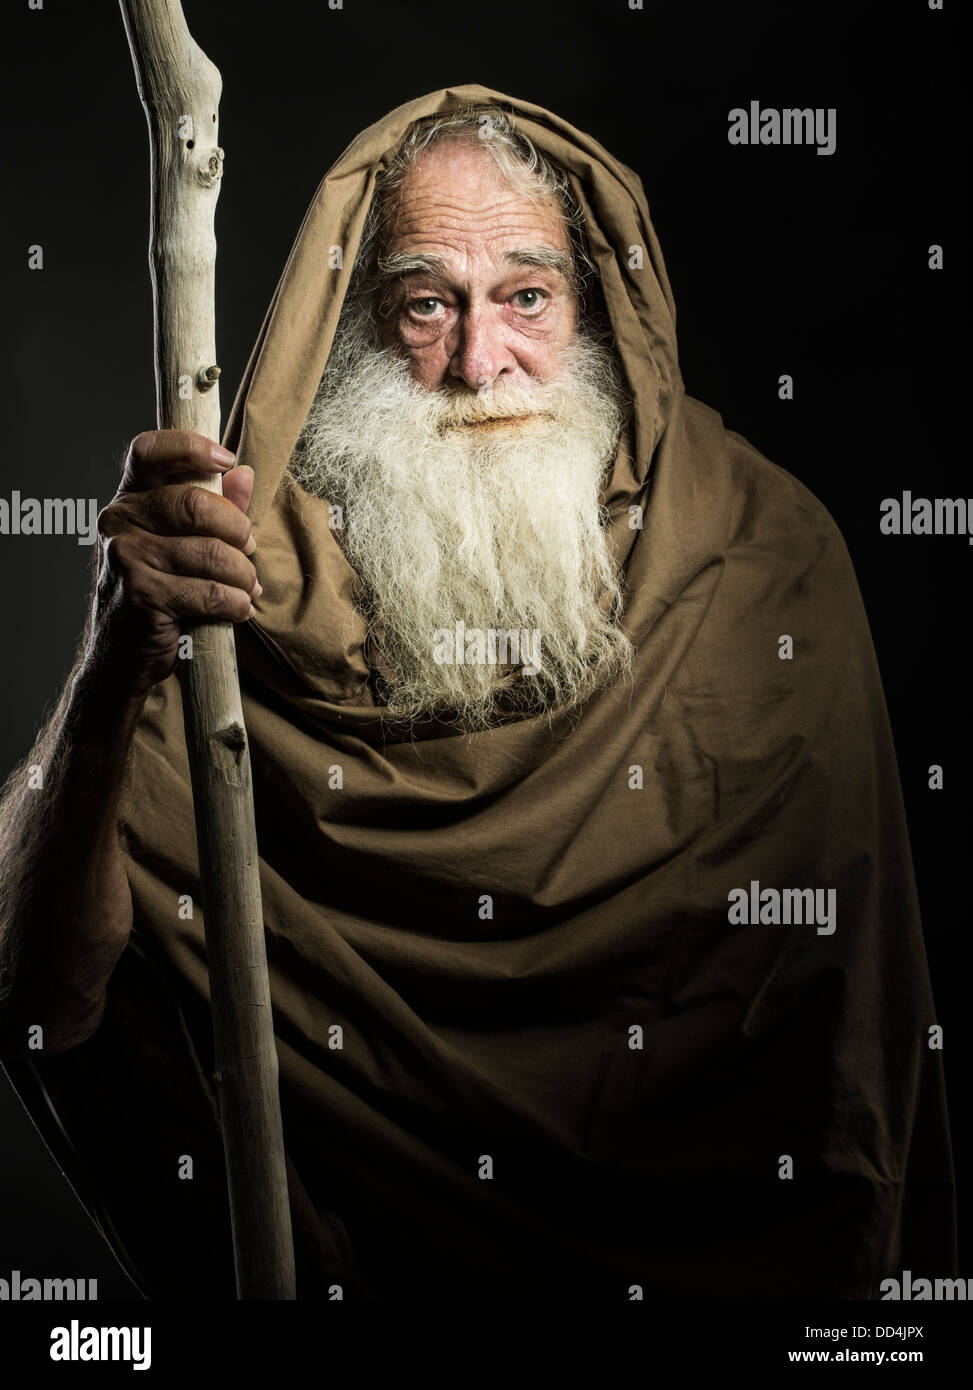 old man with white beard staff and cloak looks like wizard / Gandalf